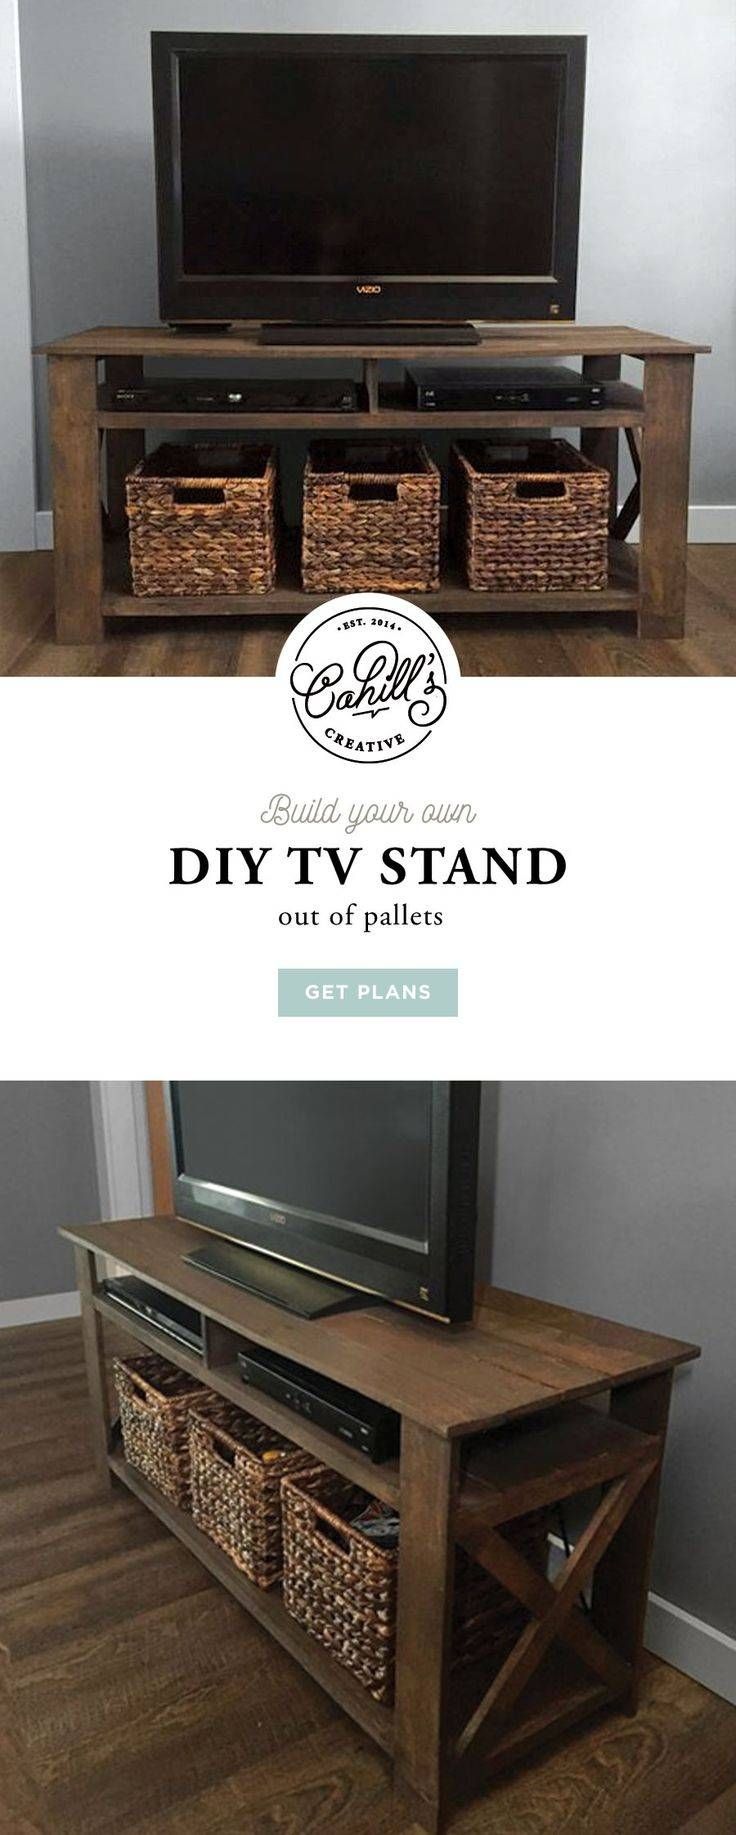 Best 25+ Diy Tv Stand Ideas On Pinterest | Diy Furniture Redo Intended For Rustic Red Tv Stands (View 12 of 15)